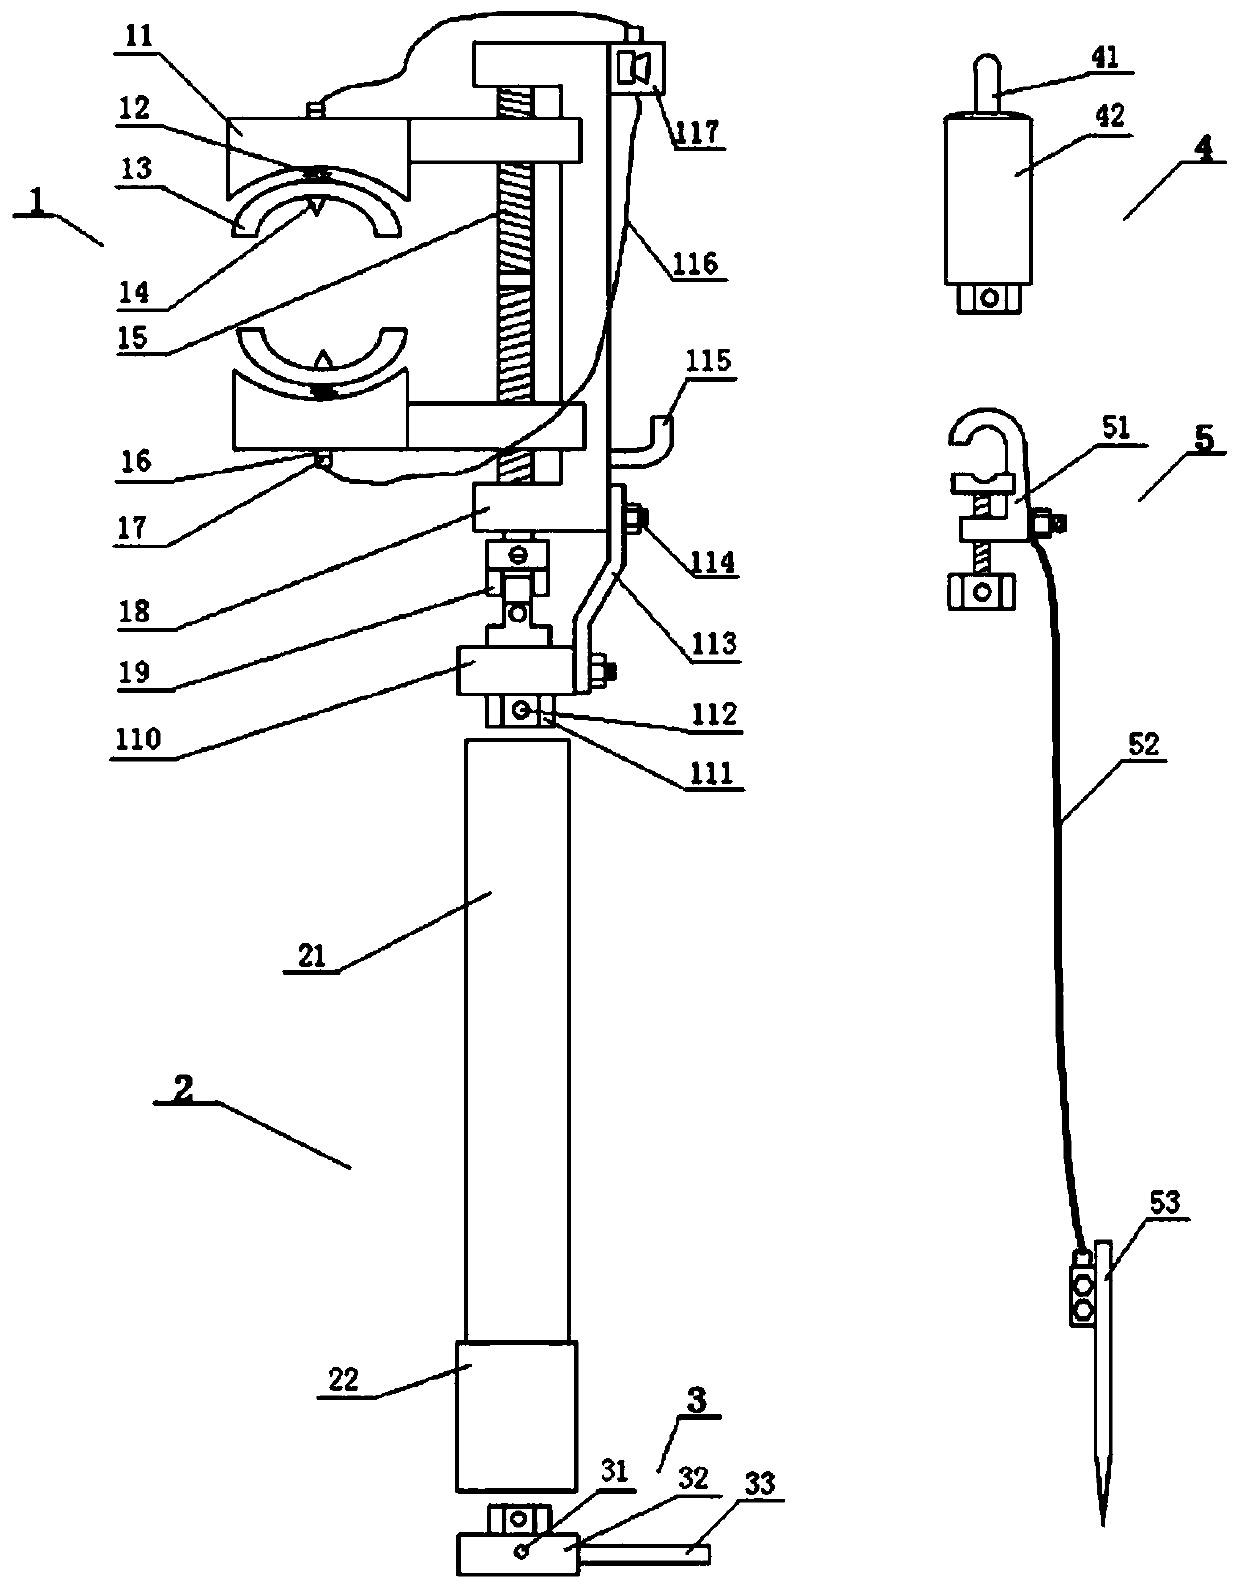 Portable overhead insulated conductor grounding device